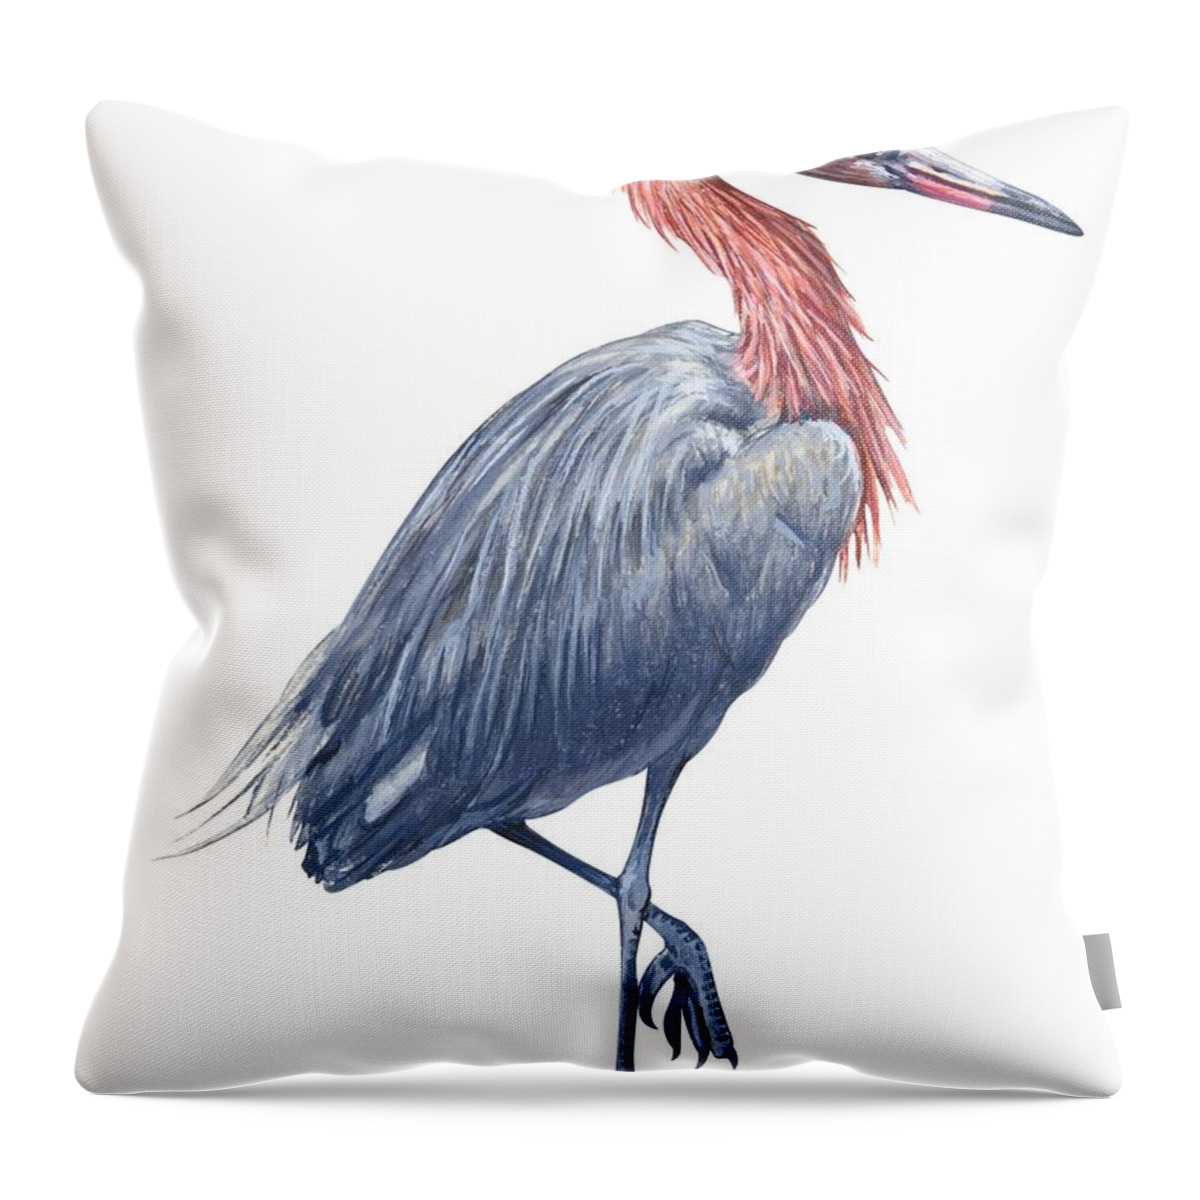 No People; Vertical; Side View; Full Length; White Background; One Animal; Wildlife; Close Up; Zoology; Illustration And Painting; Bird; Beak; Feather; Standing On One Leg; Reddish Egret; Egretta Rufescens Throw Pillow featuring the drawing Reddish egret by Anonymous